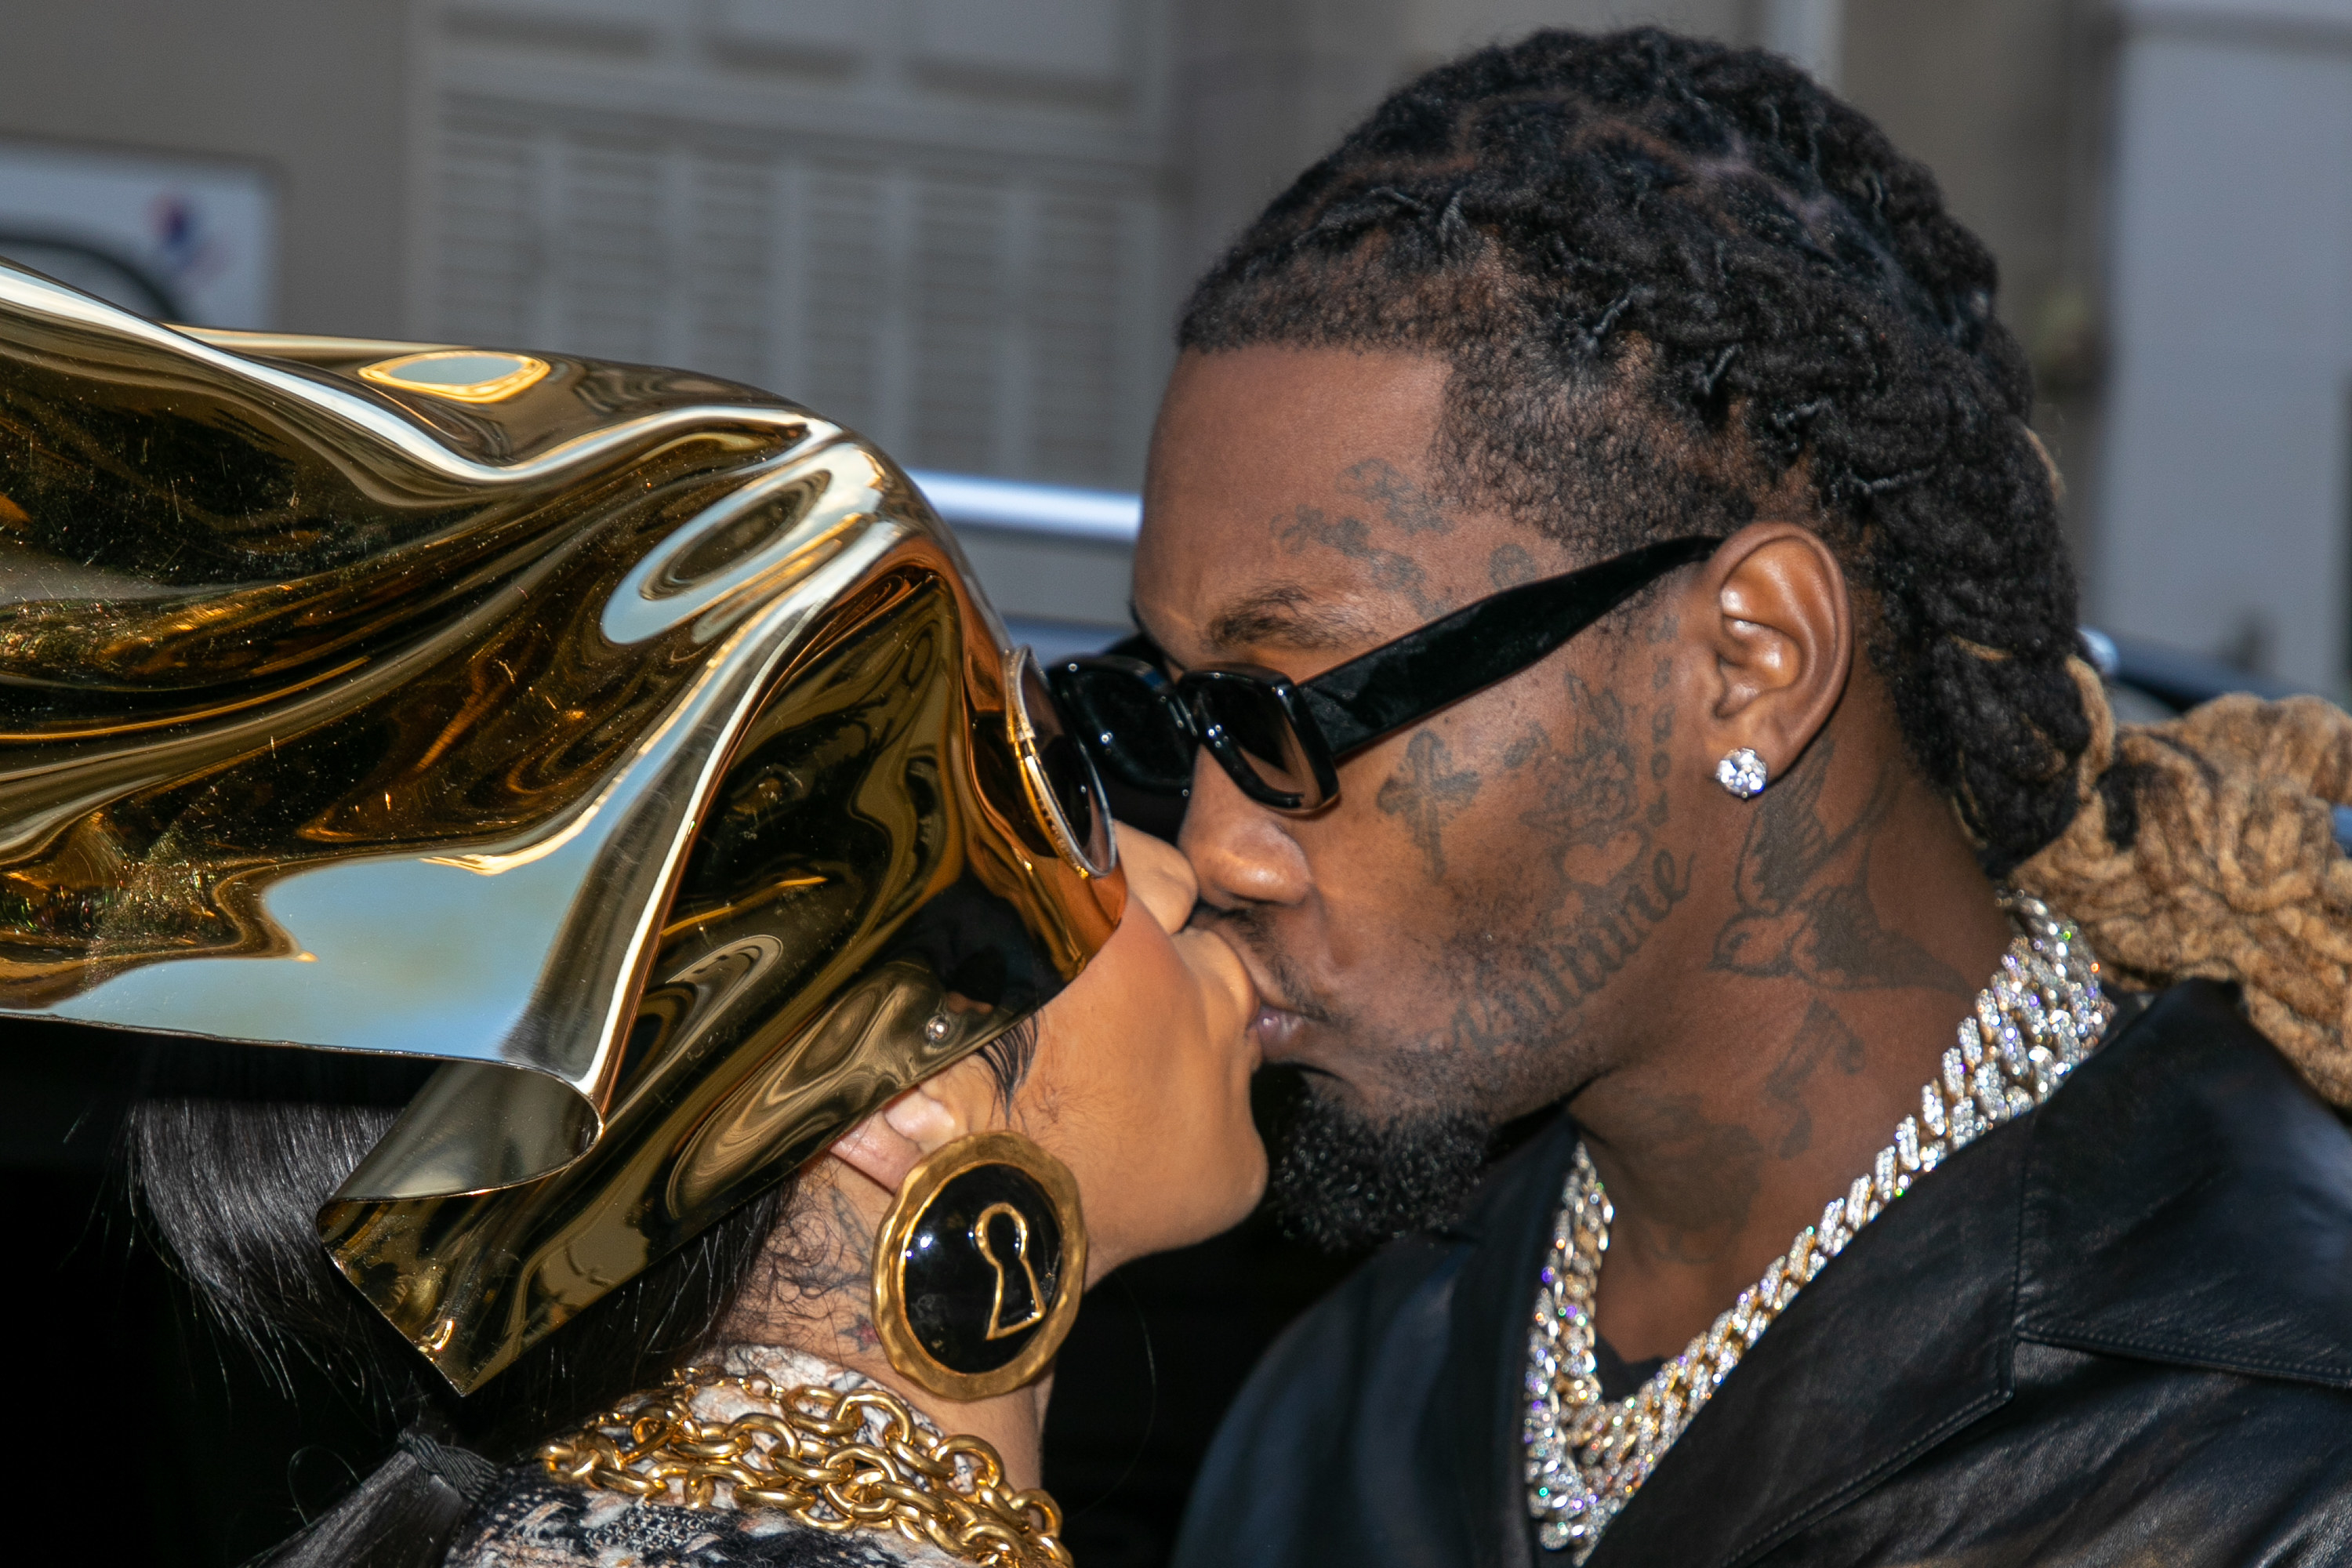 Cardi B and Offset kissing at an event